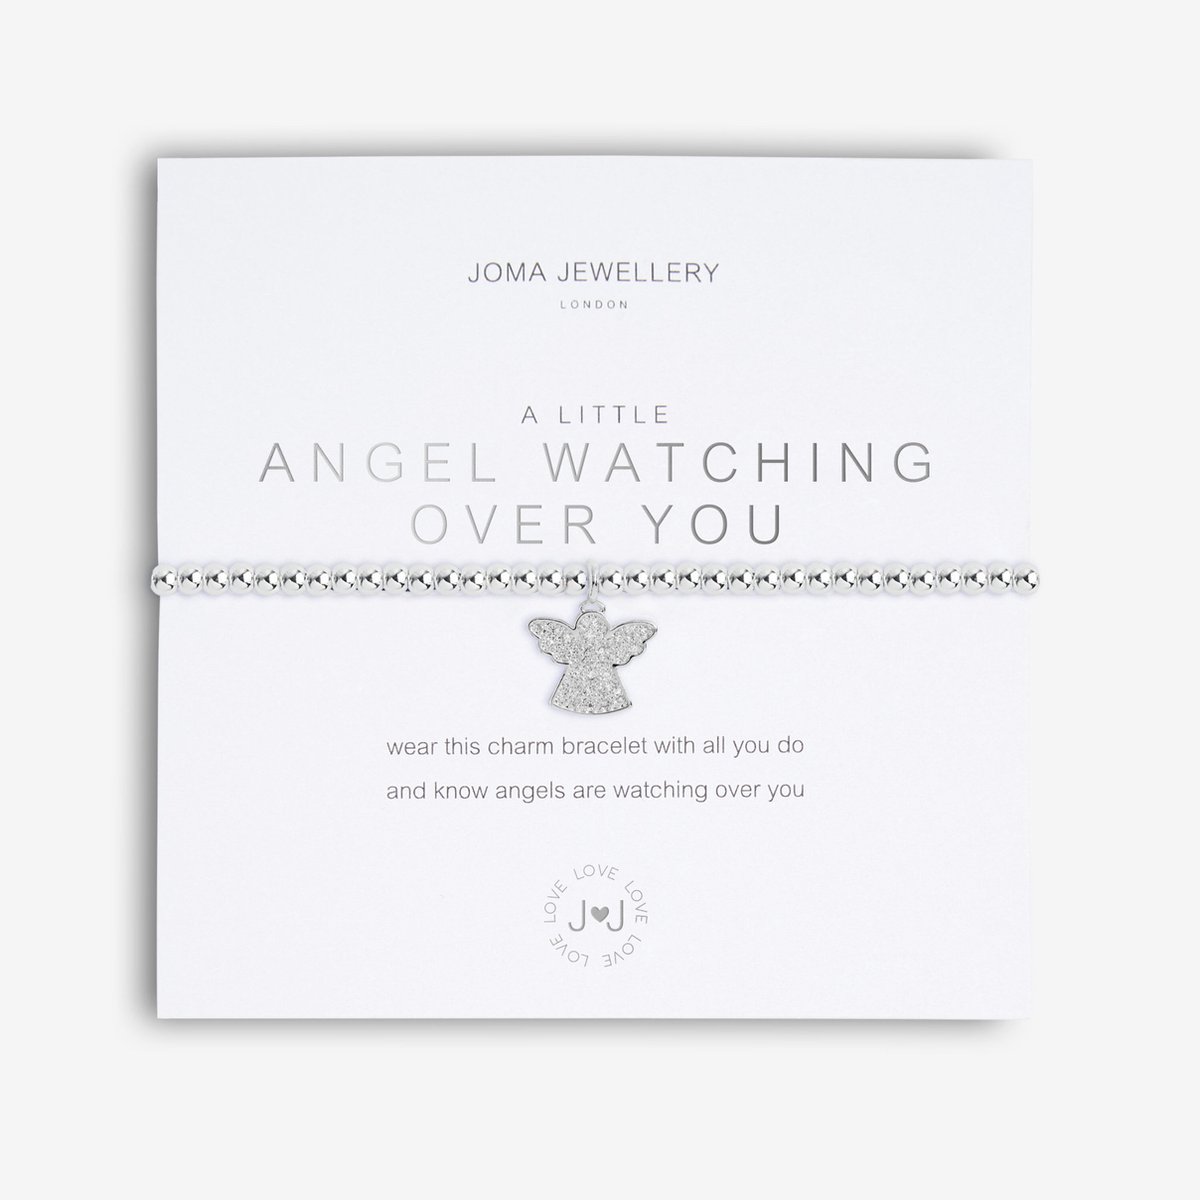 Joma Jewellery - A Little - Angels Watching over You - Armband